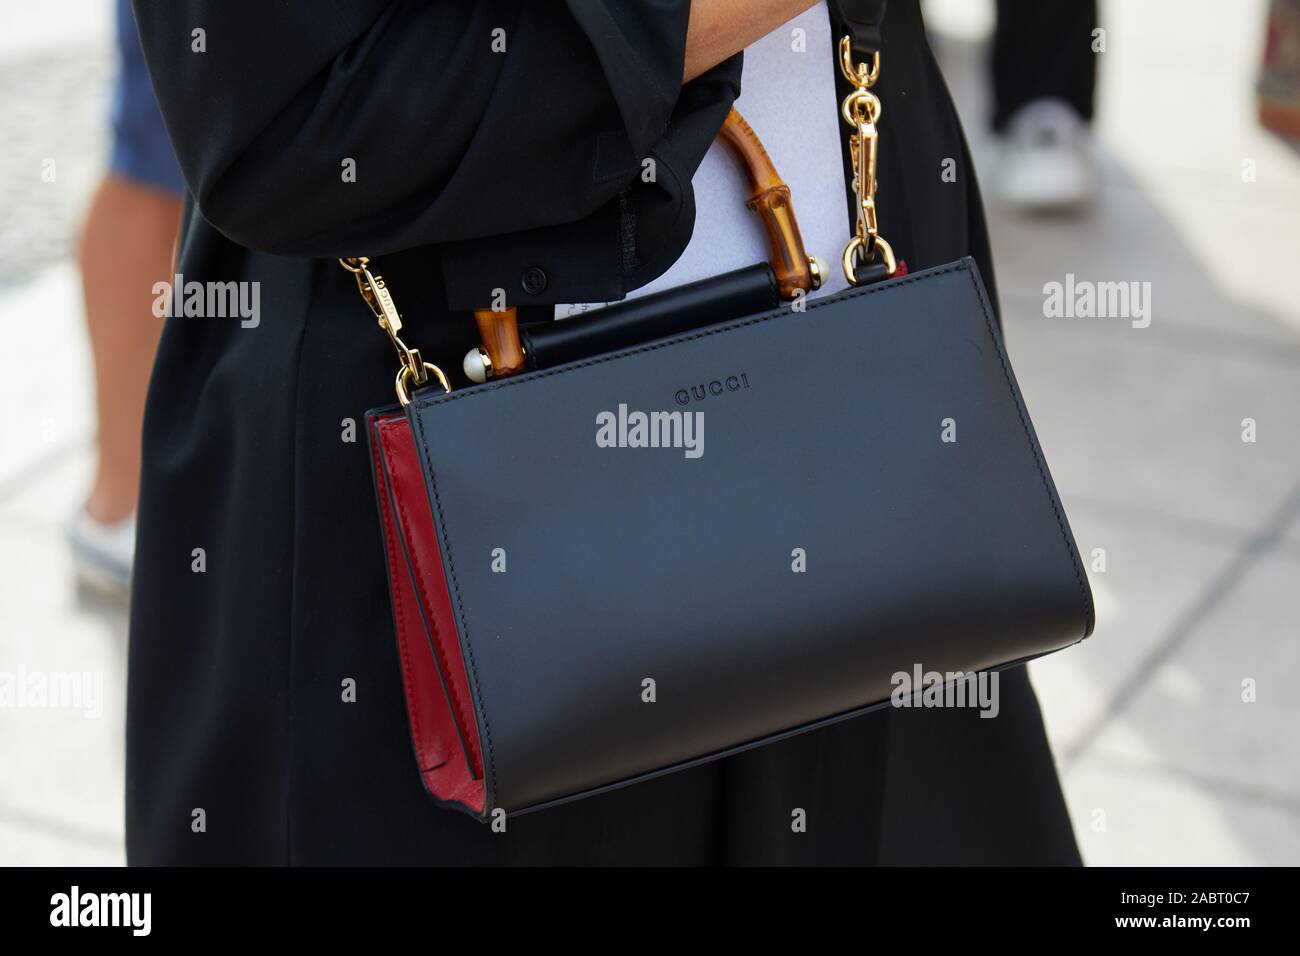 black and red gucci bag